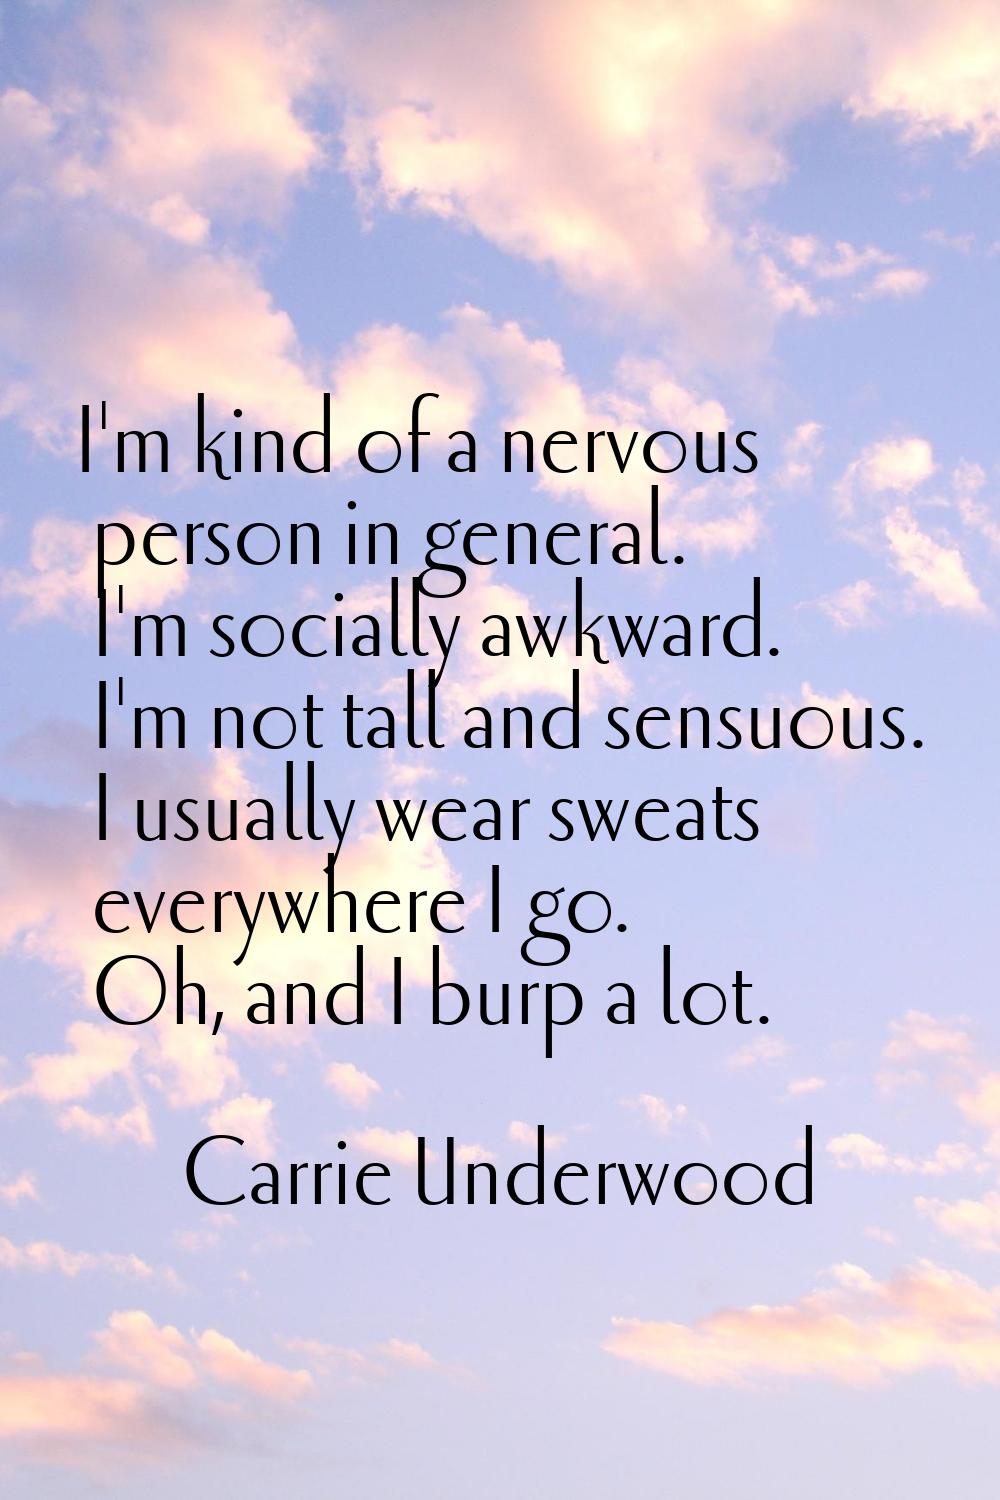 I'm kind of a nervous person in general. I'm socially awkward. I'm not tall and sensuous. I usually